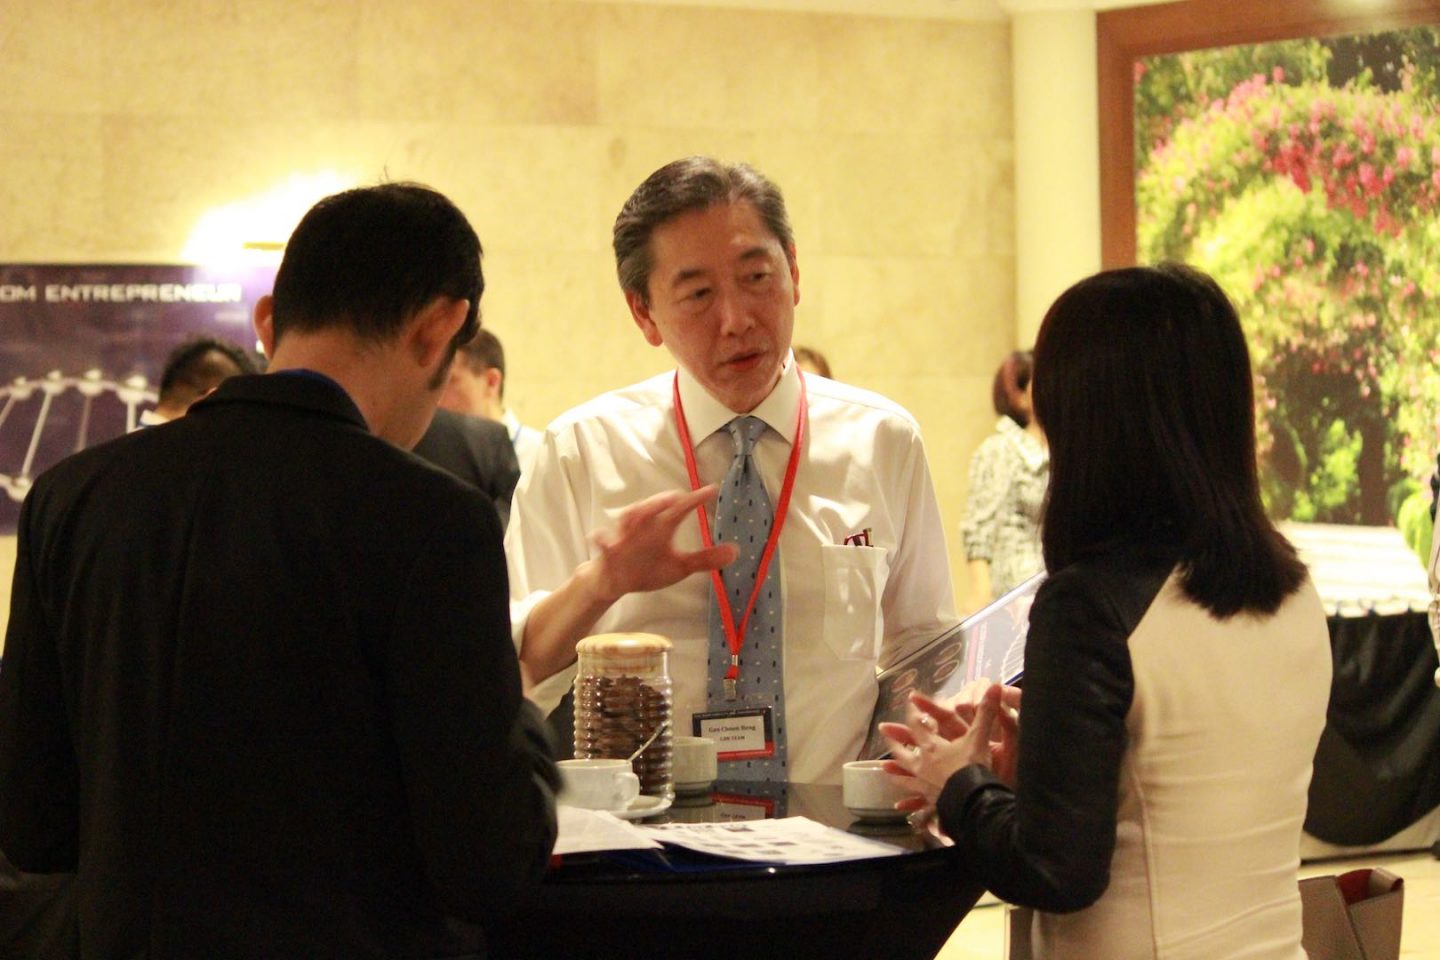 One of GBN's 10 mentors, lawyer Gan Choon Beng of Infinitus Law Corporation, sowing into the lives of GBN participants.